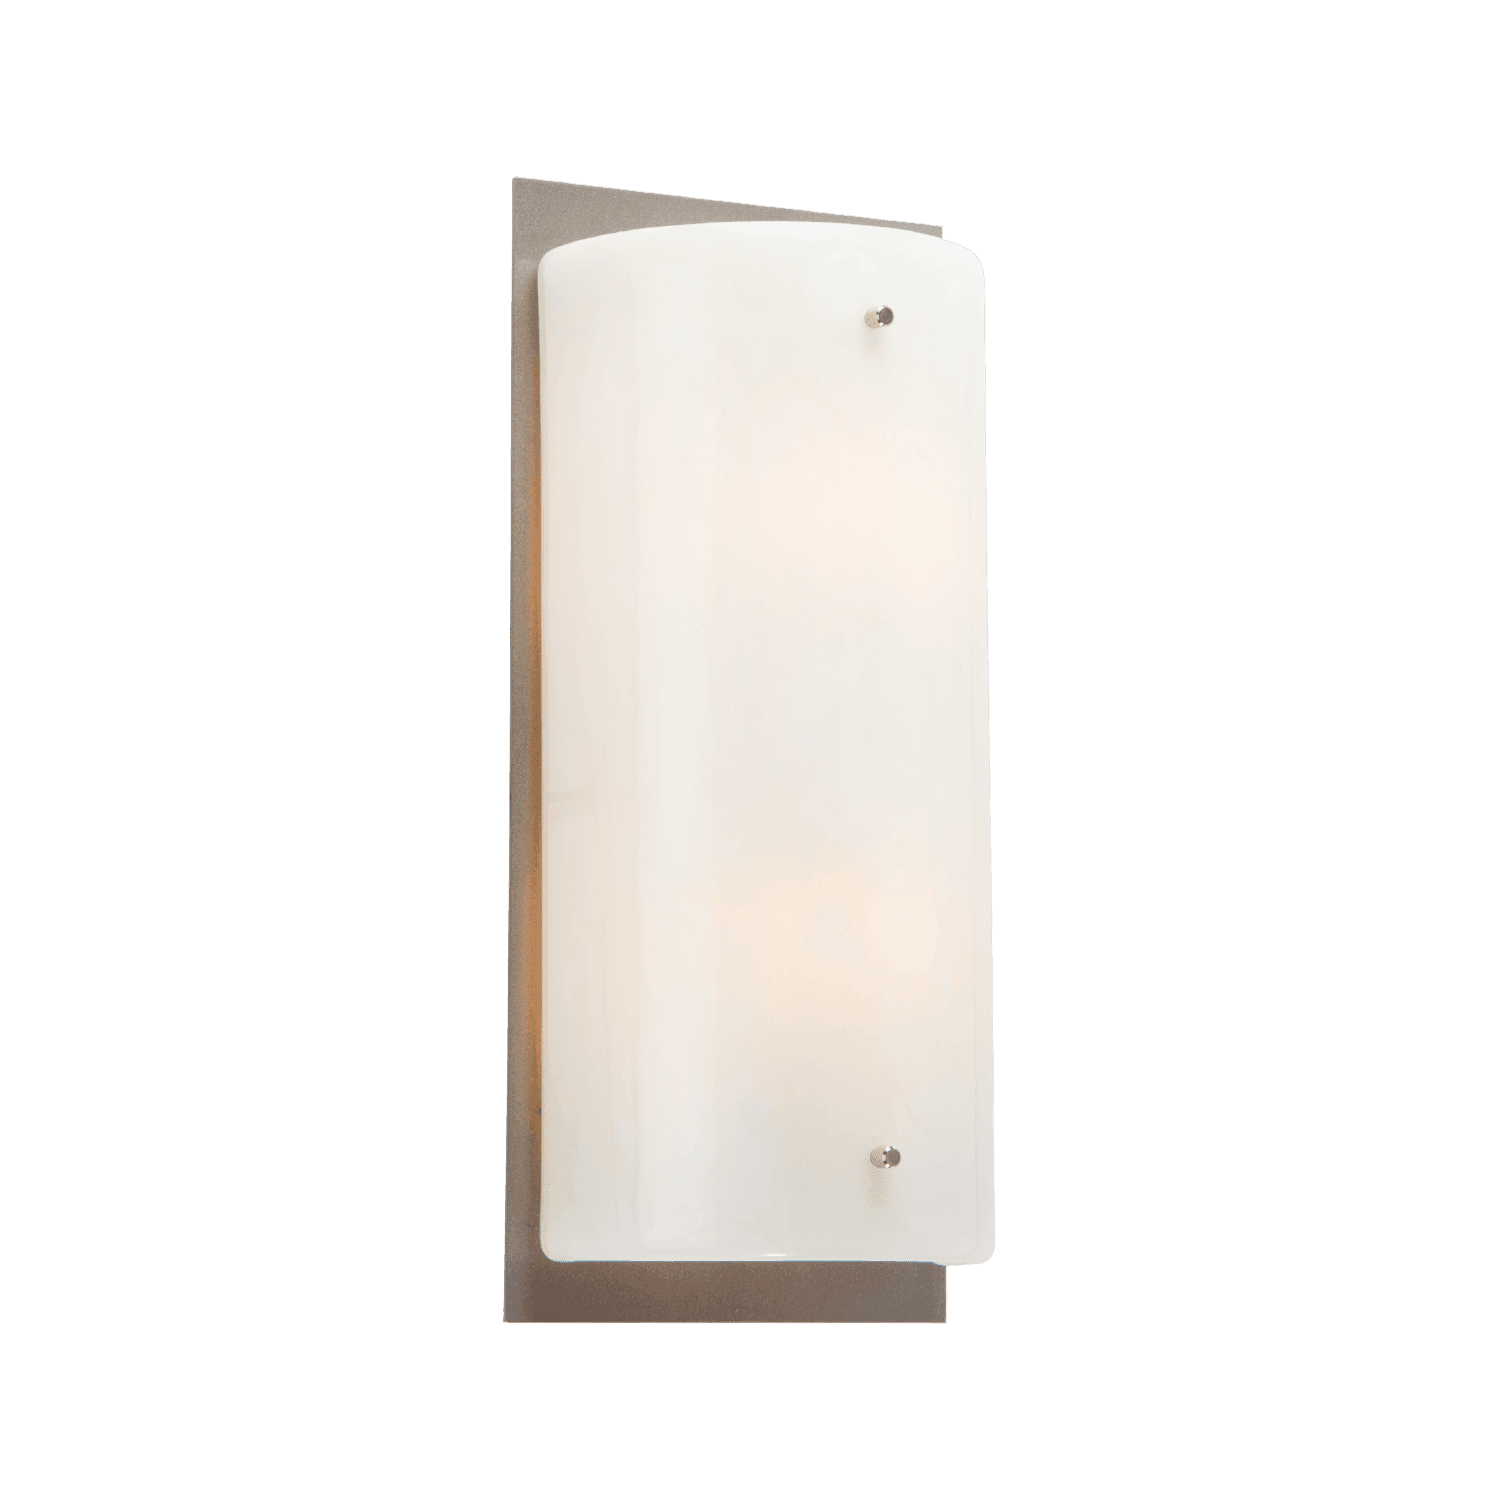 Hammerton Studio - Textured Glass Cover Sconce - CSB0044-13-BS-IW-E2 | Montreal Lighting & Hardware